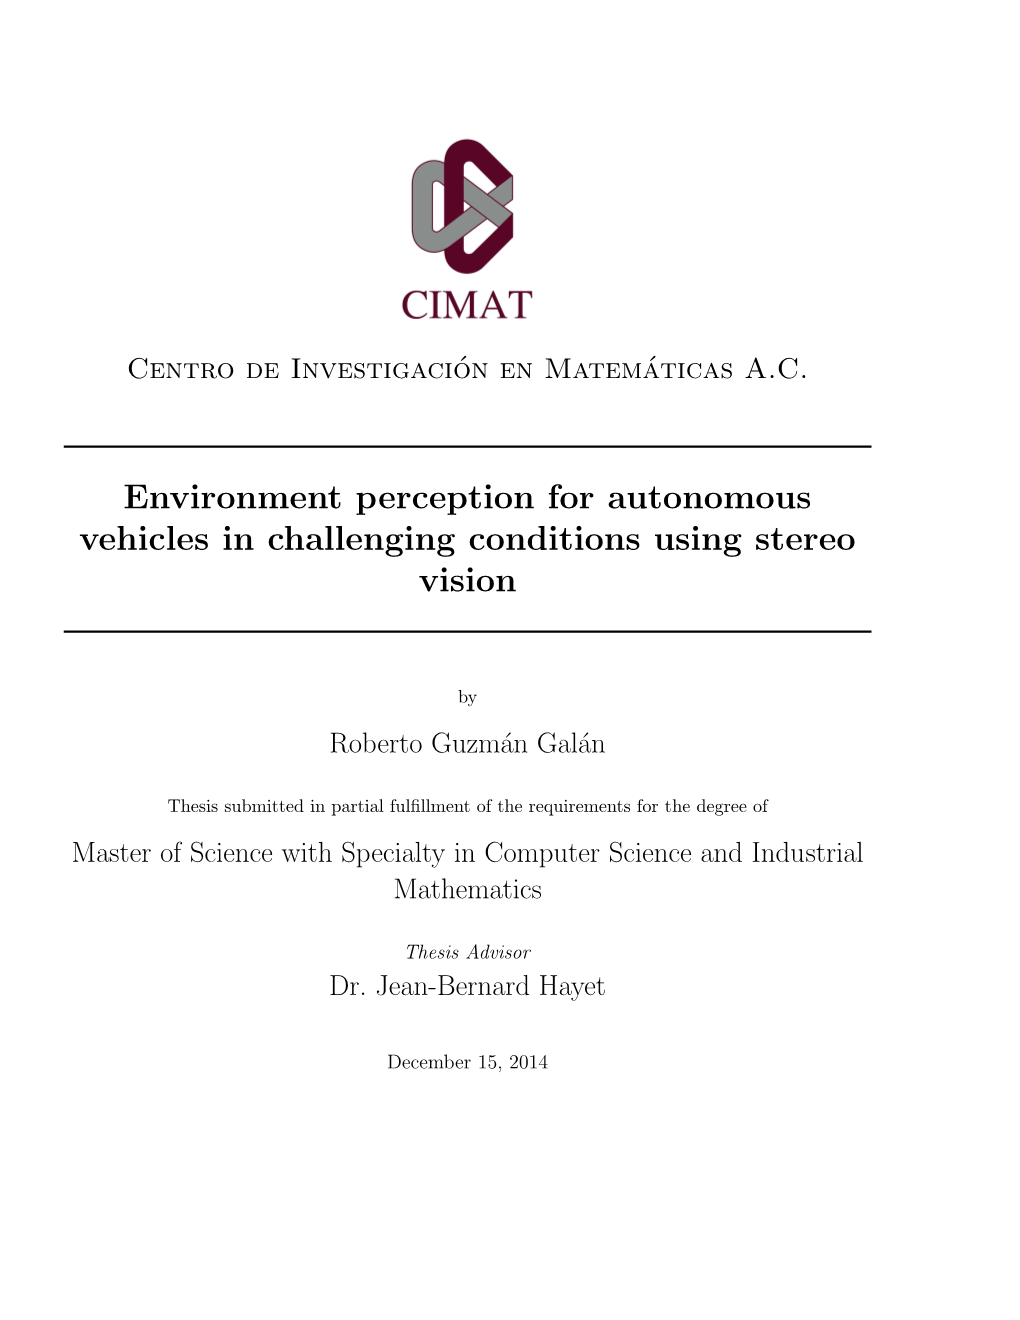 Environment Perception for Autonomous Vehicles in Challenging Conditions Using Stereo Vision